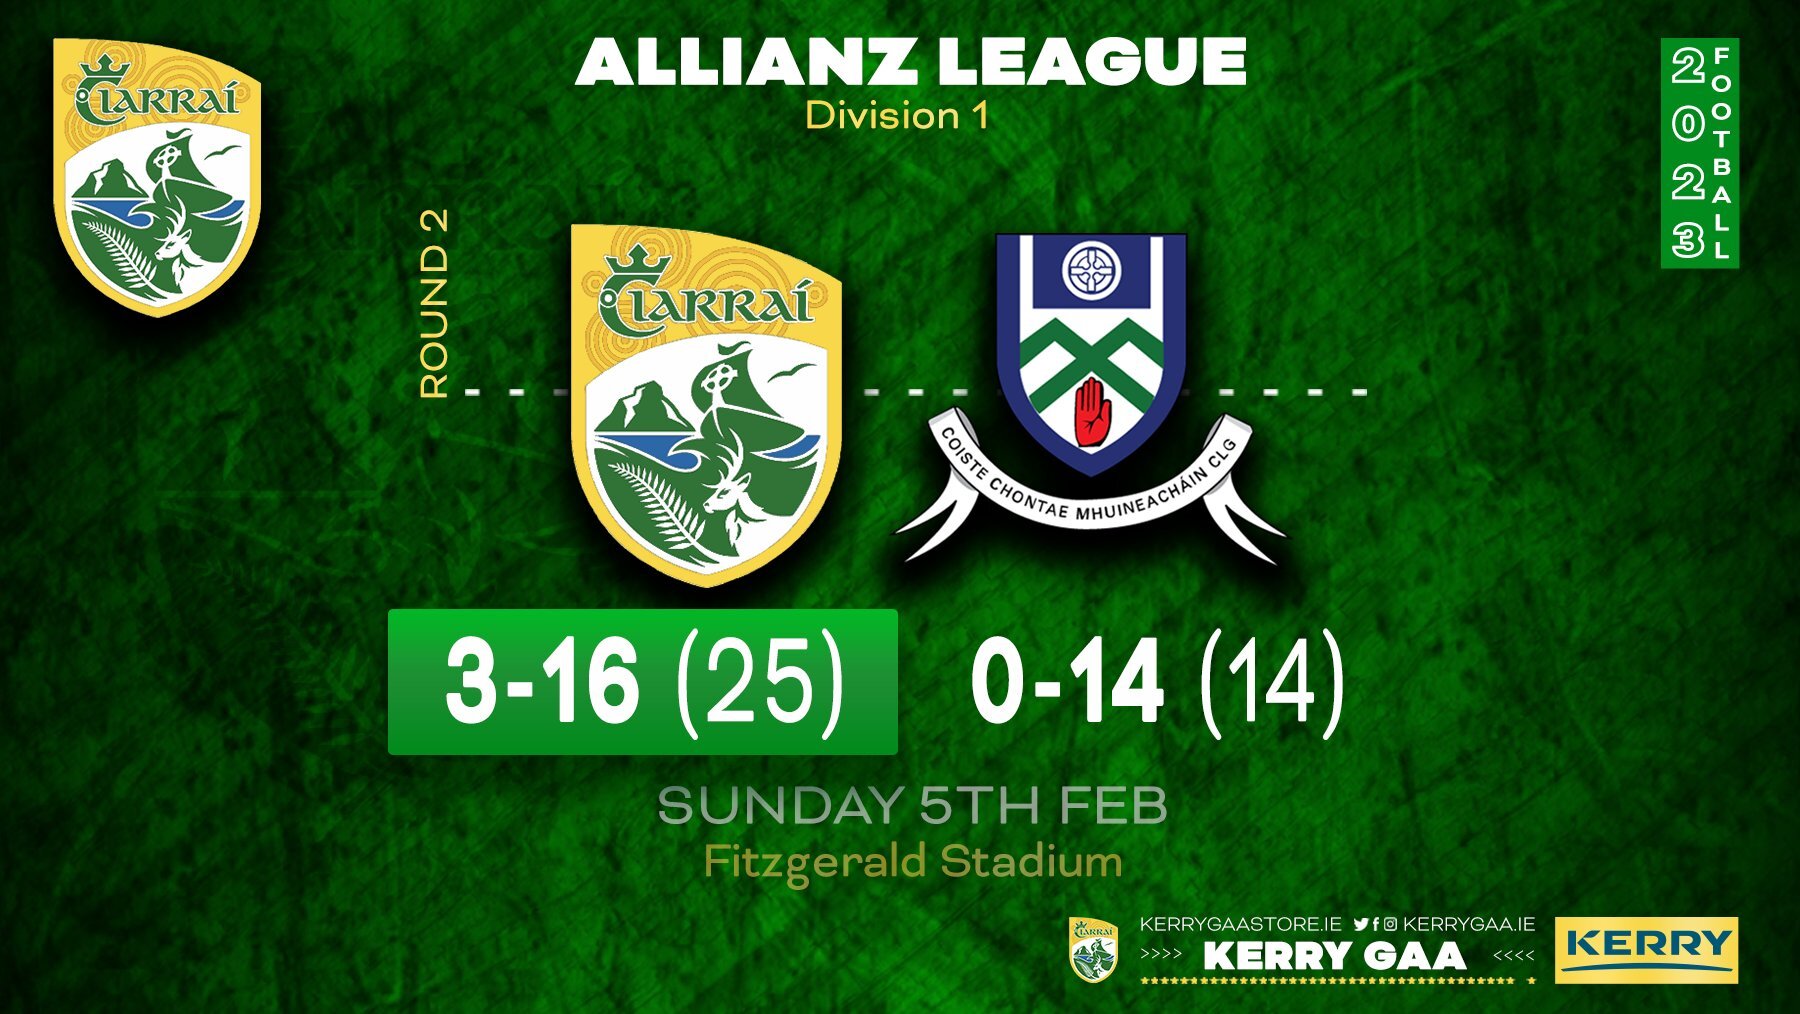 Victory for Footballers over Monaghan in AFL Rd 2